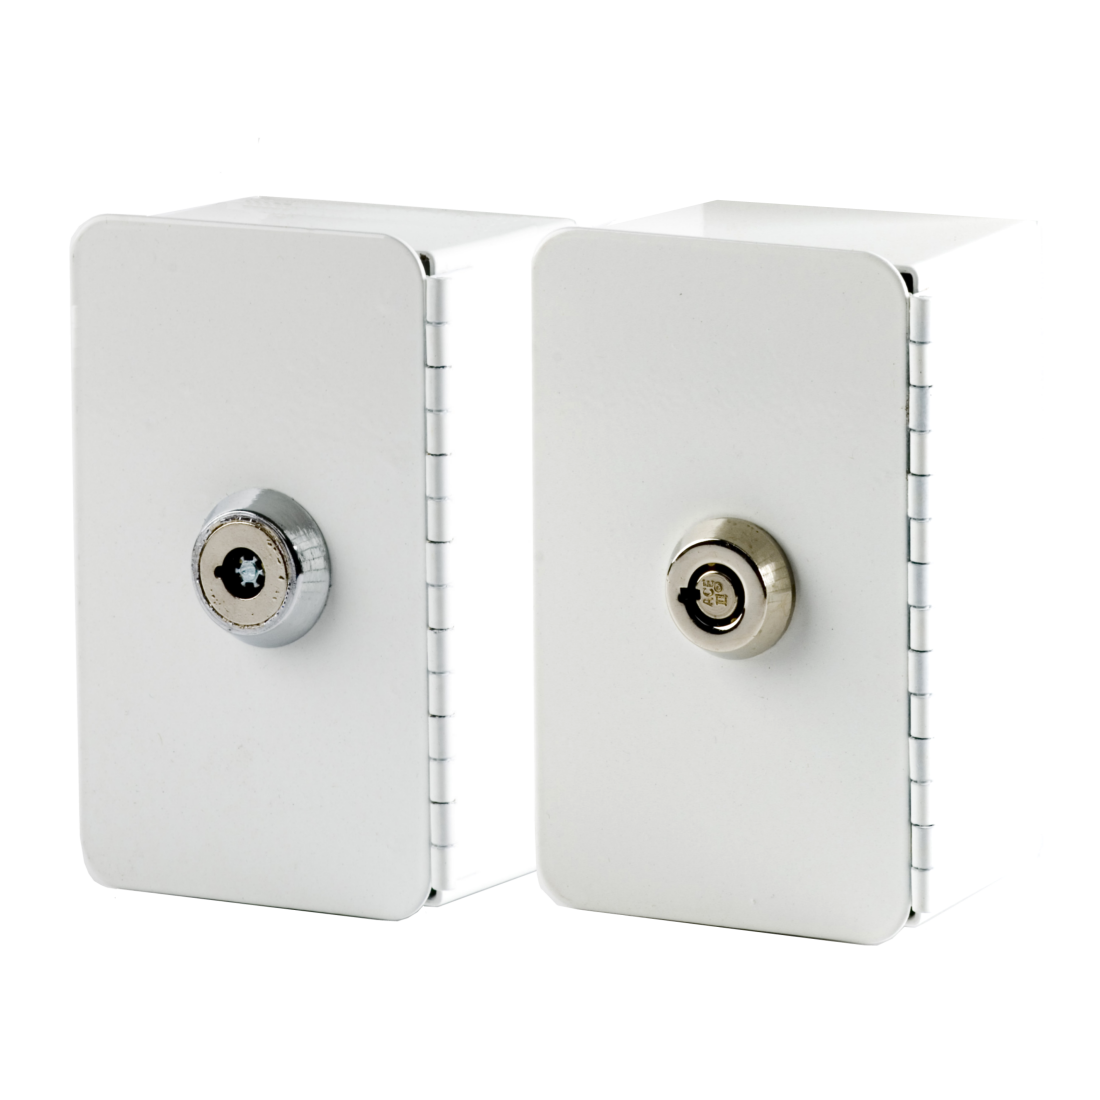 Utility Wall Mount Lock Box with Slot , - Choice of Roper or ACE Lock  Mechanism 